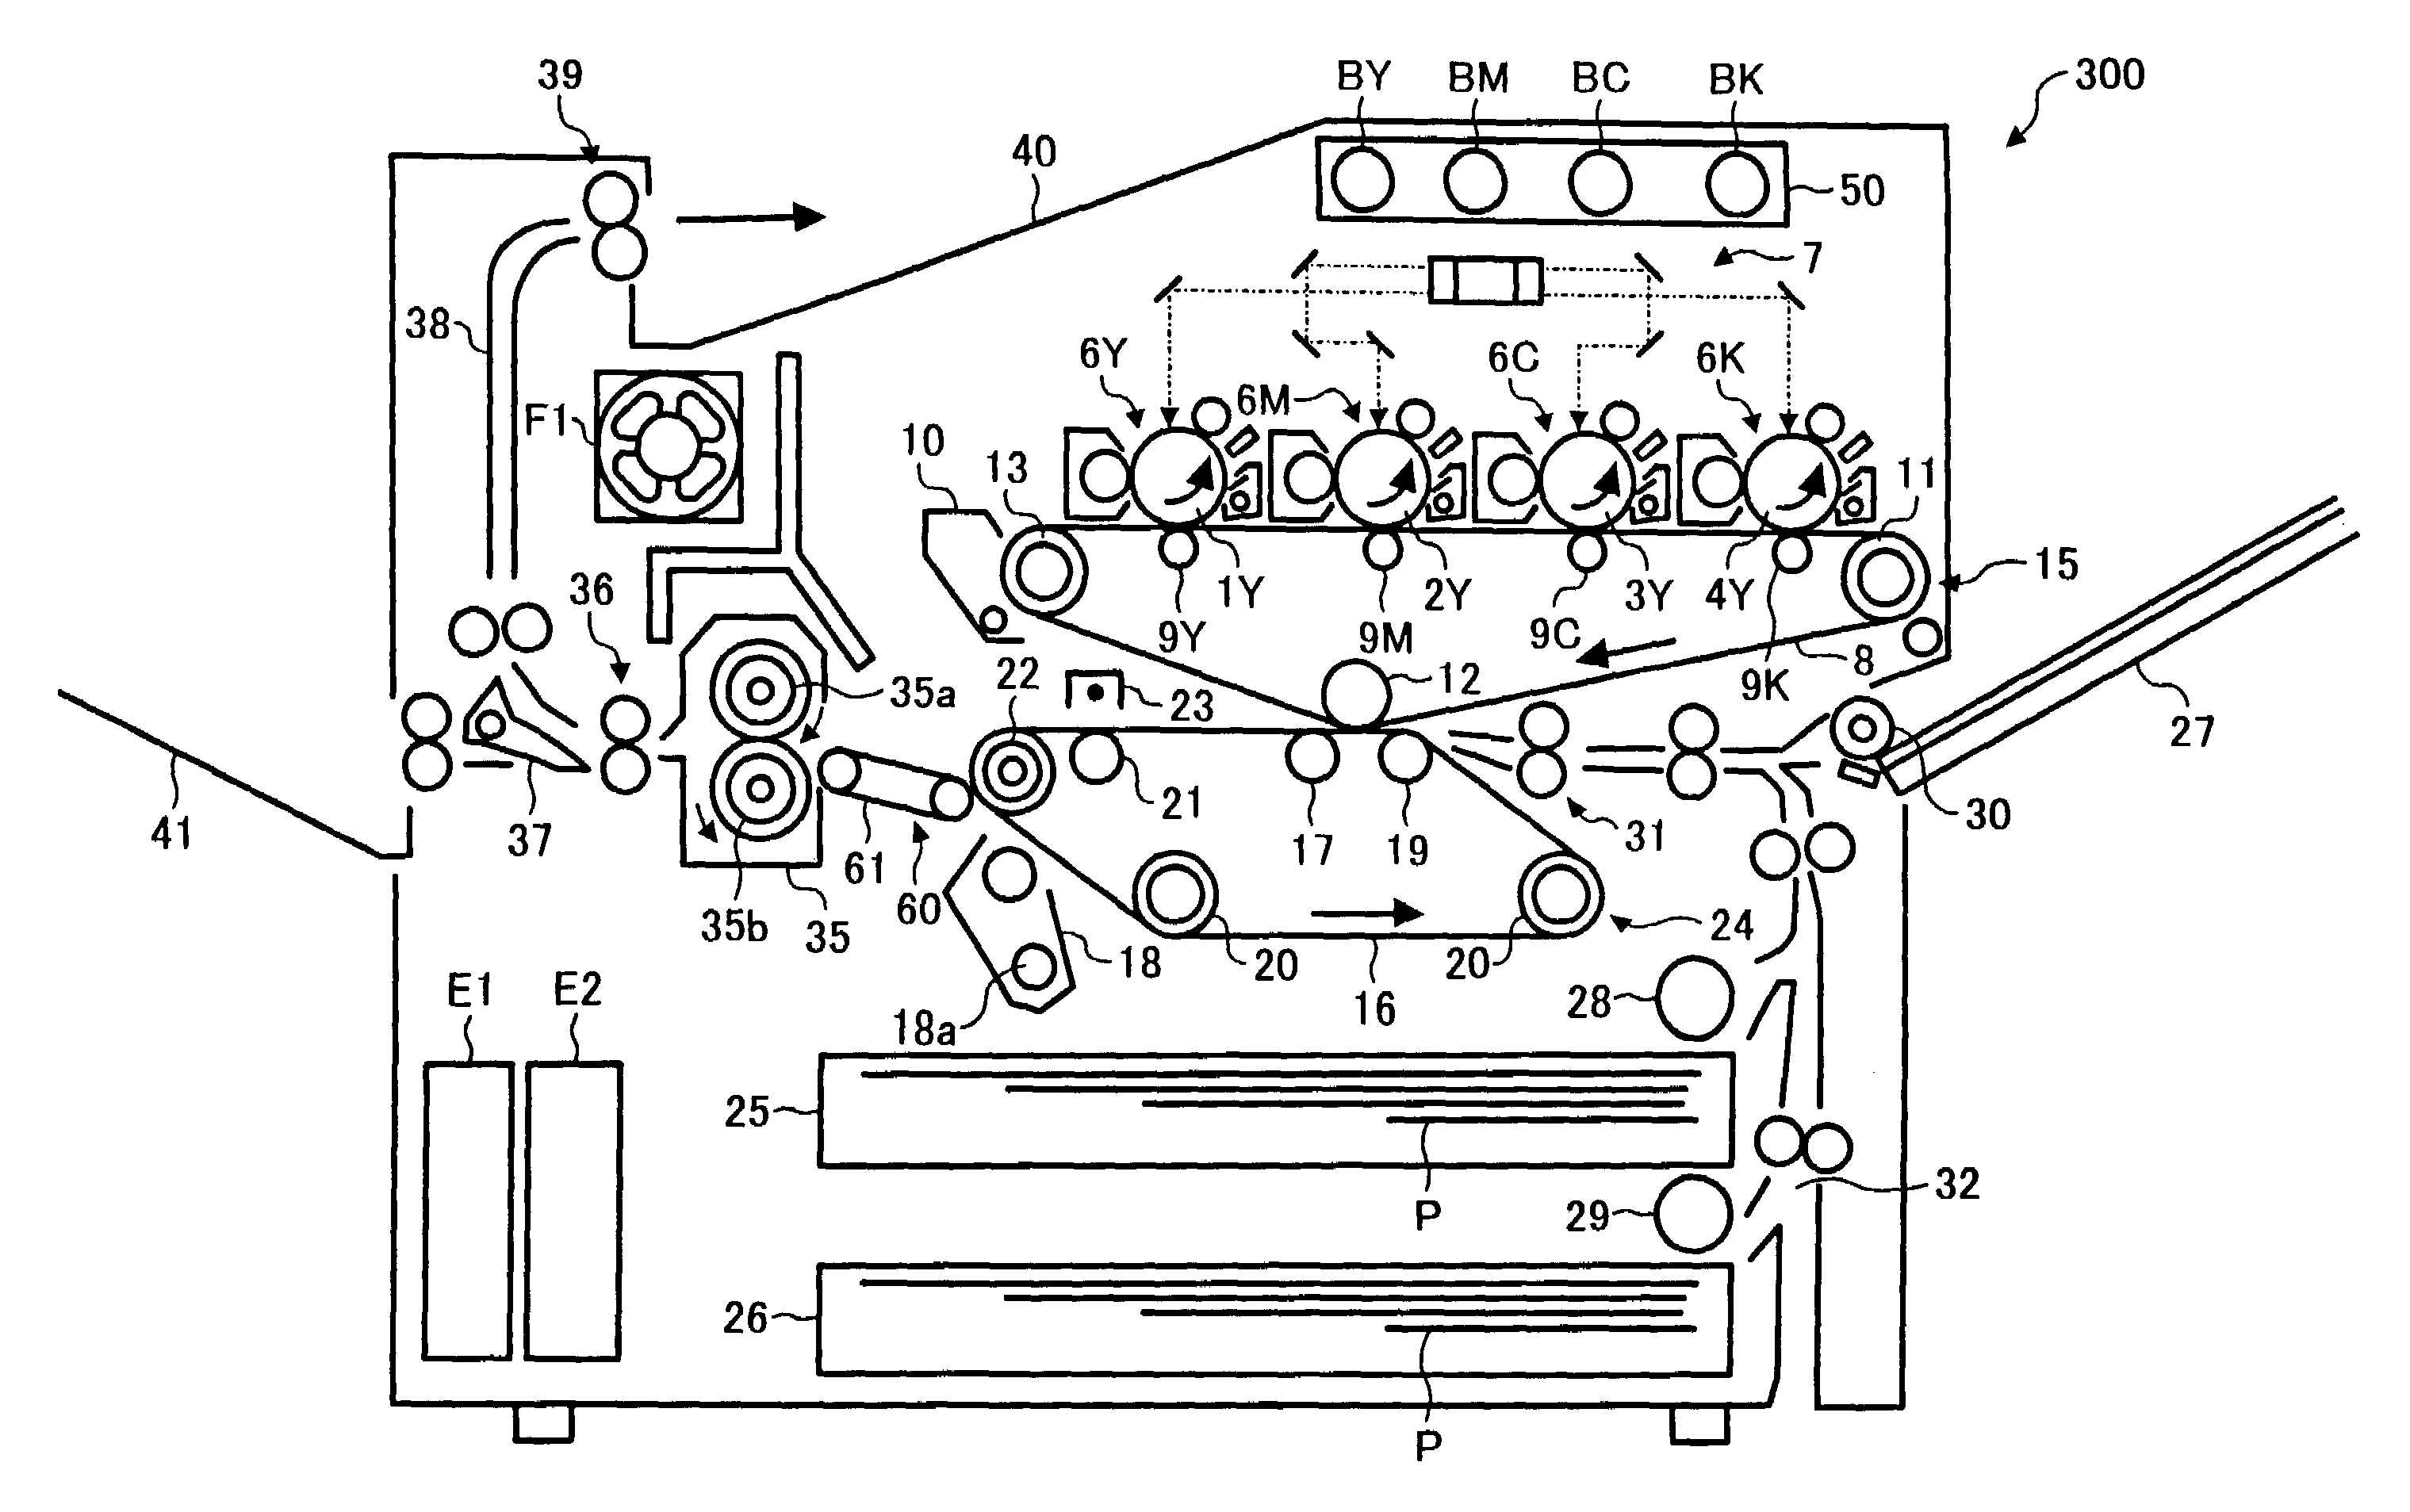 Image forming apparatus including a conveyance unit for passing a recording medium